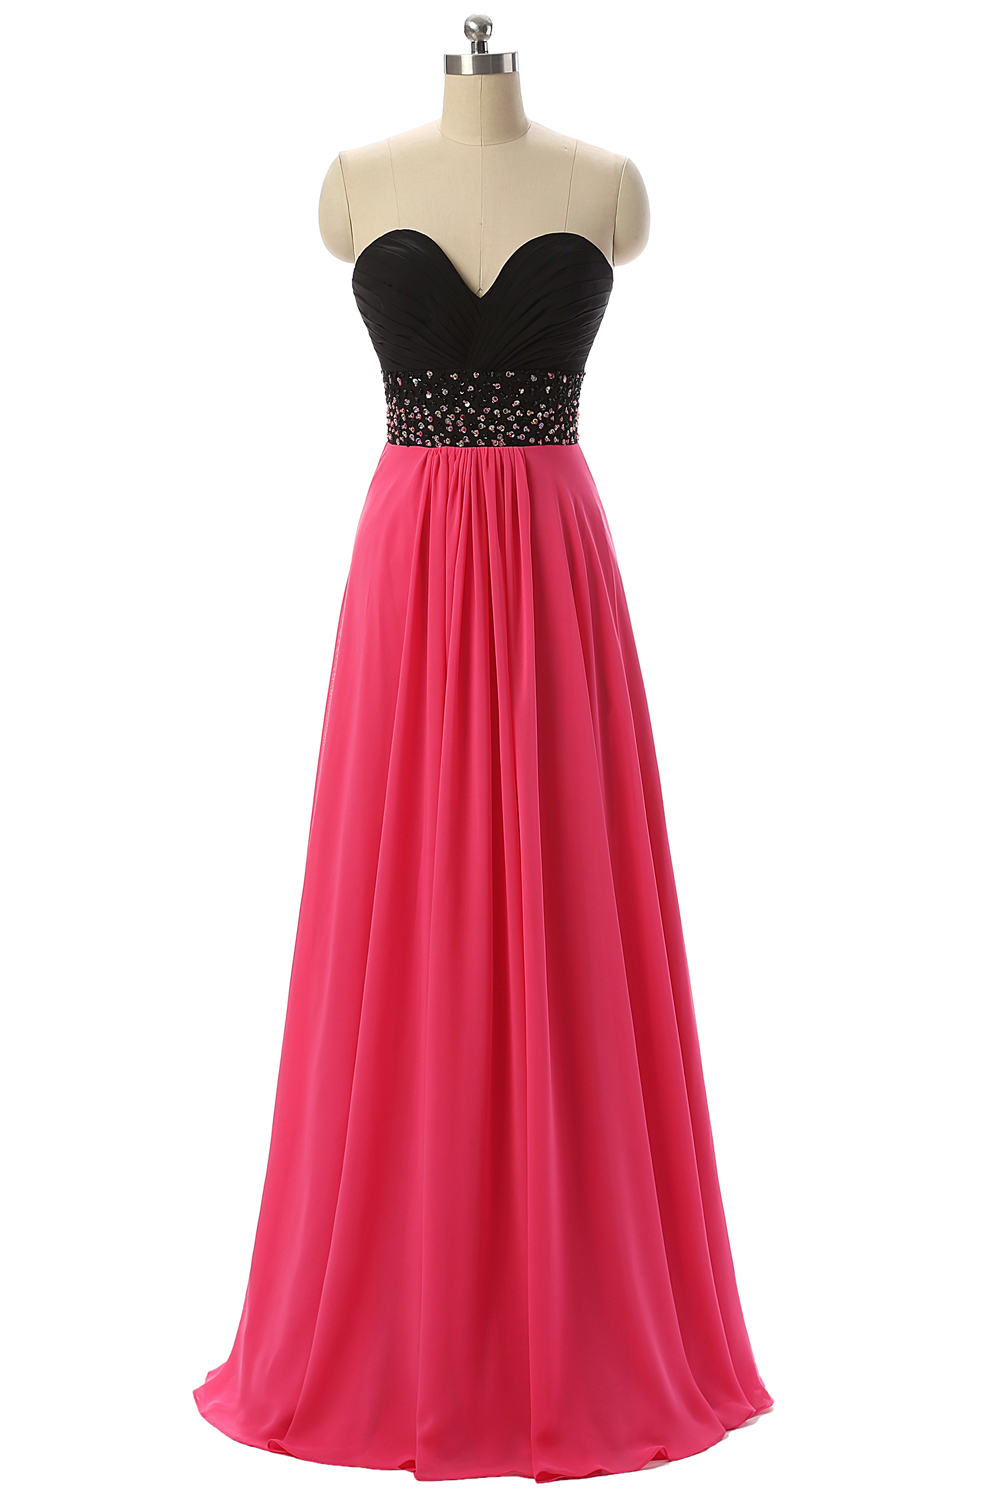 Prom Dresses,sweetheart Prom Dress,simple Party Dress,formal Dresses,evening Gowns